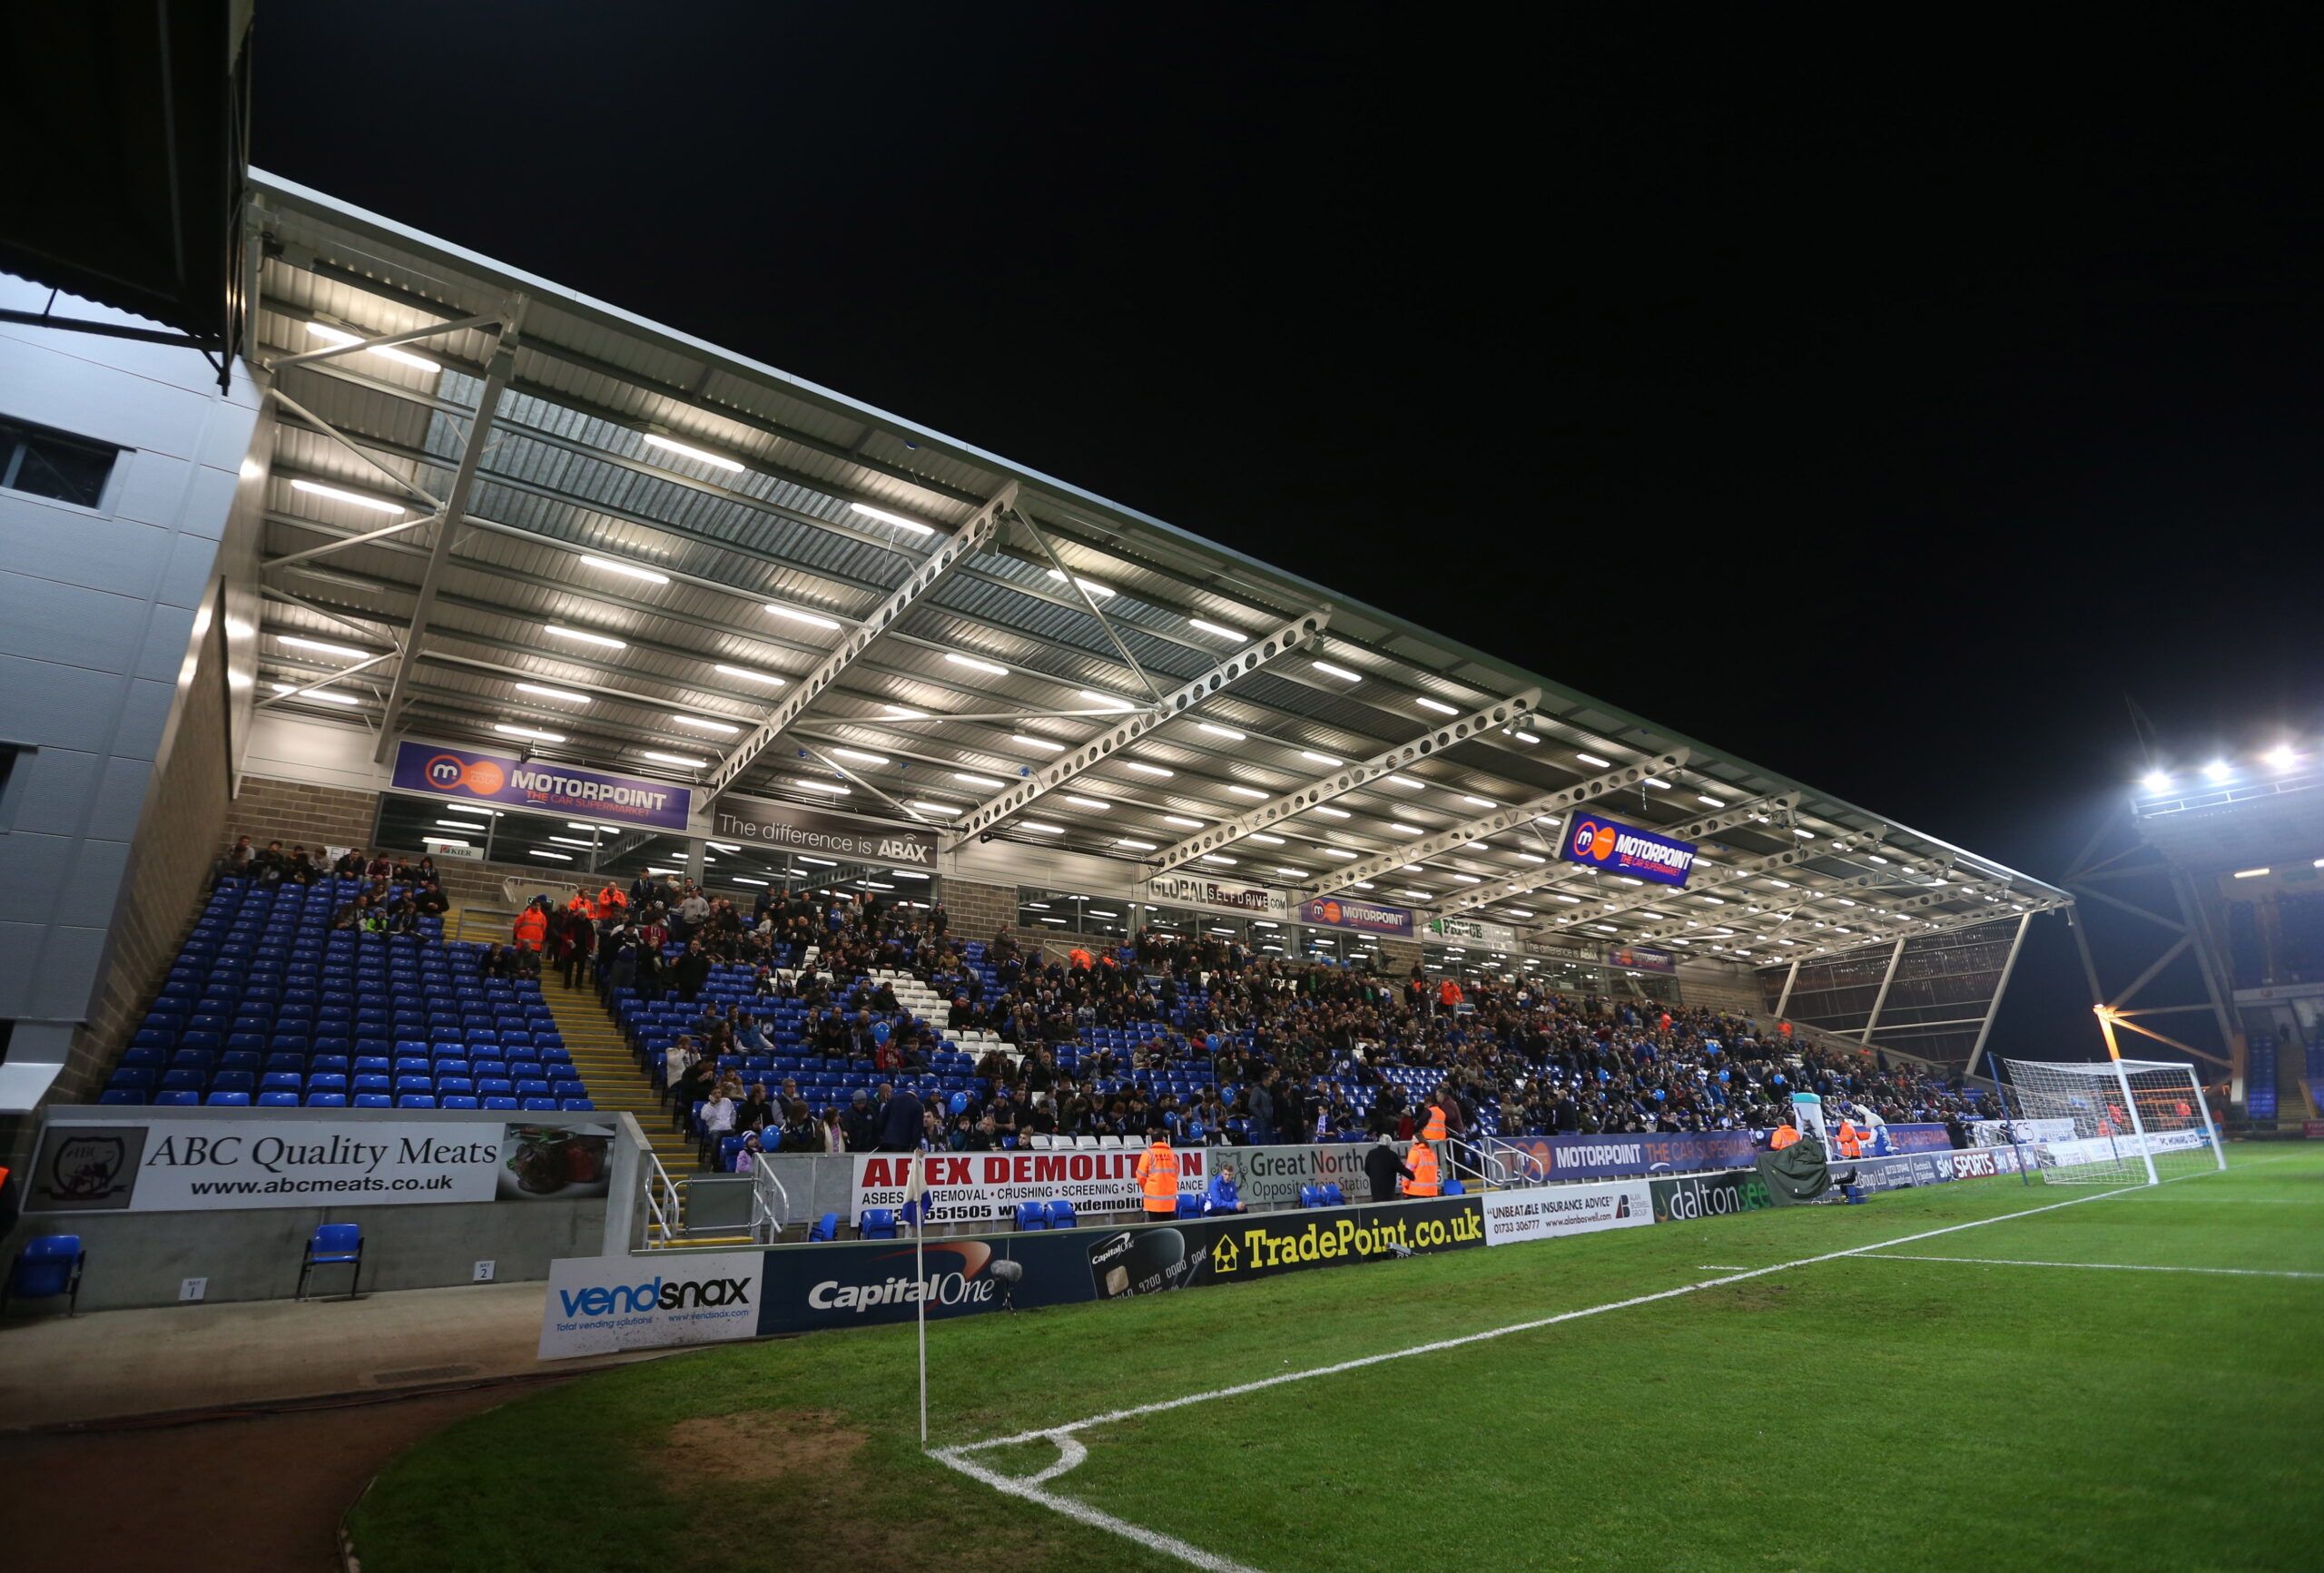 Football - Peterborough United v Bristol City - Sky Bet Football League One - London Road - 14/15 - 28/11/14 
General view 
Mandatory Credit: Action Images / Alex Morton 
EDITORIAL USE ONLY. No use with unauthorized audio, video, data, fixture lists, club/league logos or 